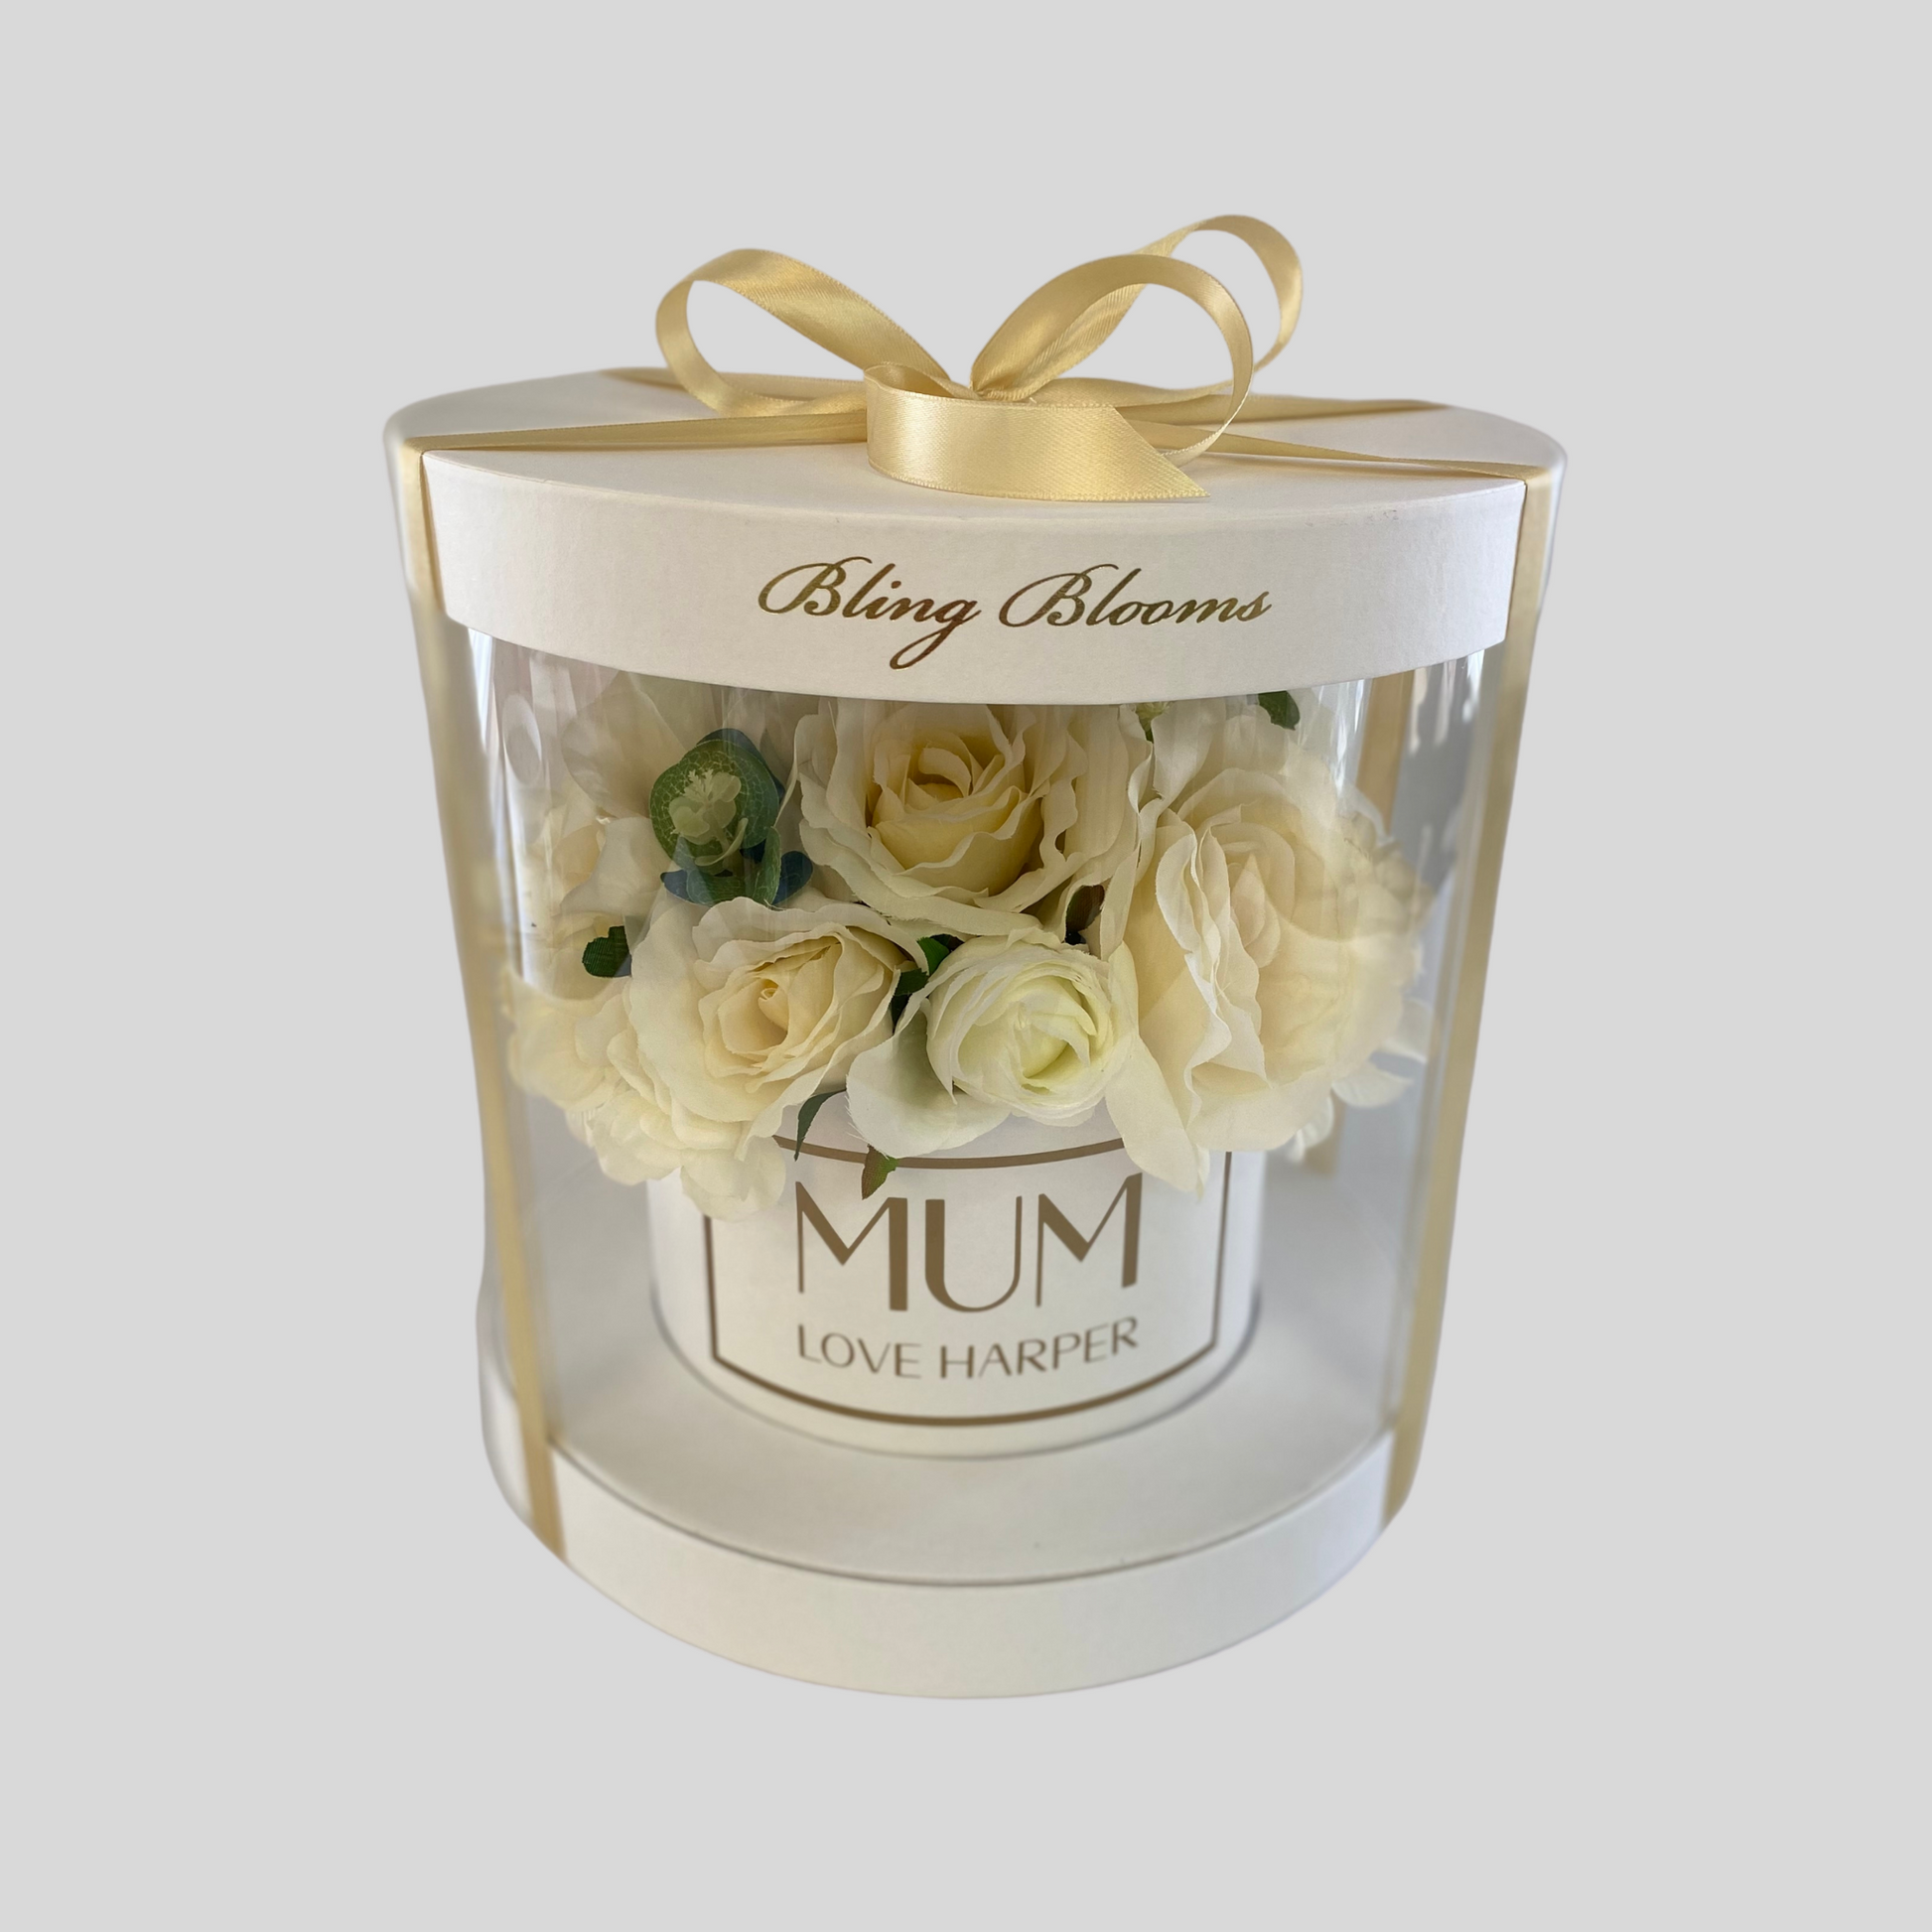 Artificial Silk Blooms Gift Box - Ivory and Blush silk flowers - personalised gift box 